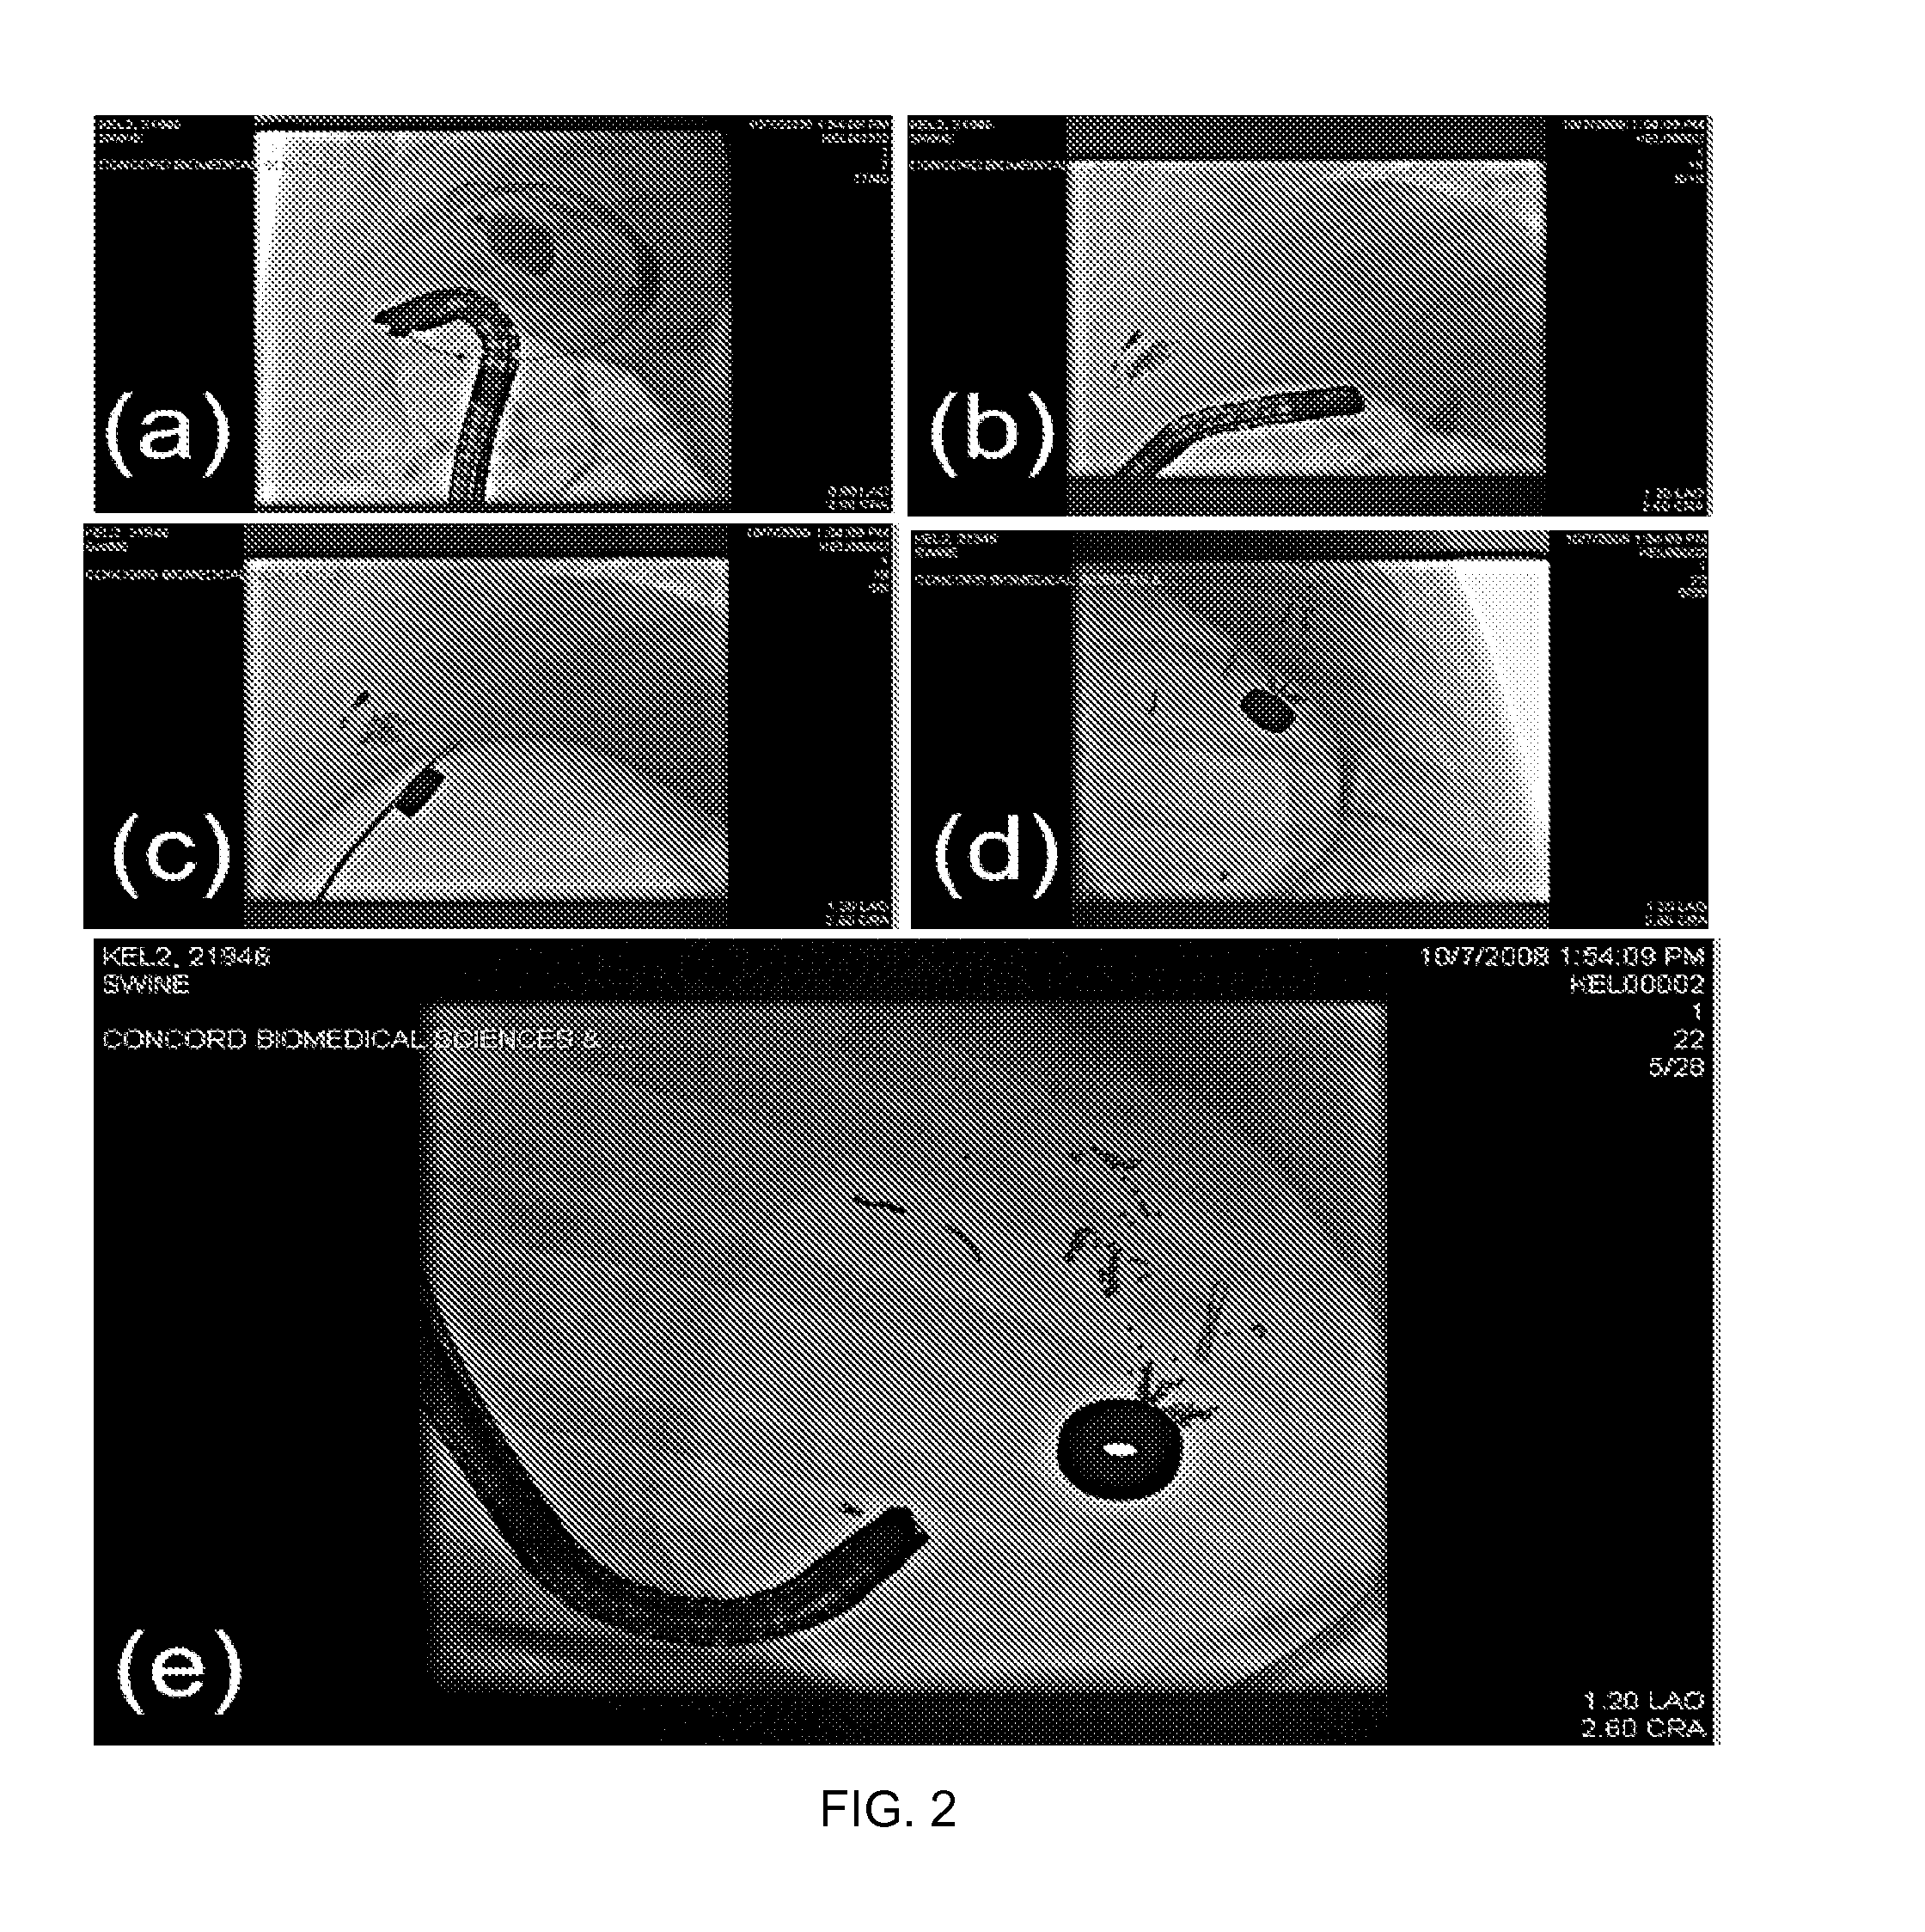 Methods and apparatus for magnet-induced compression anastomosis between adjacent organs